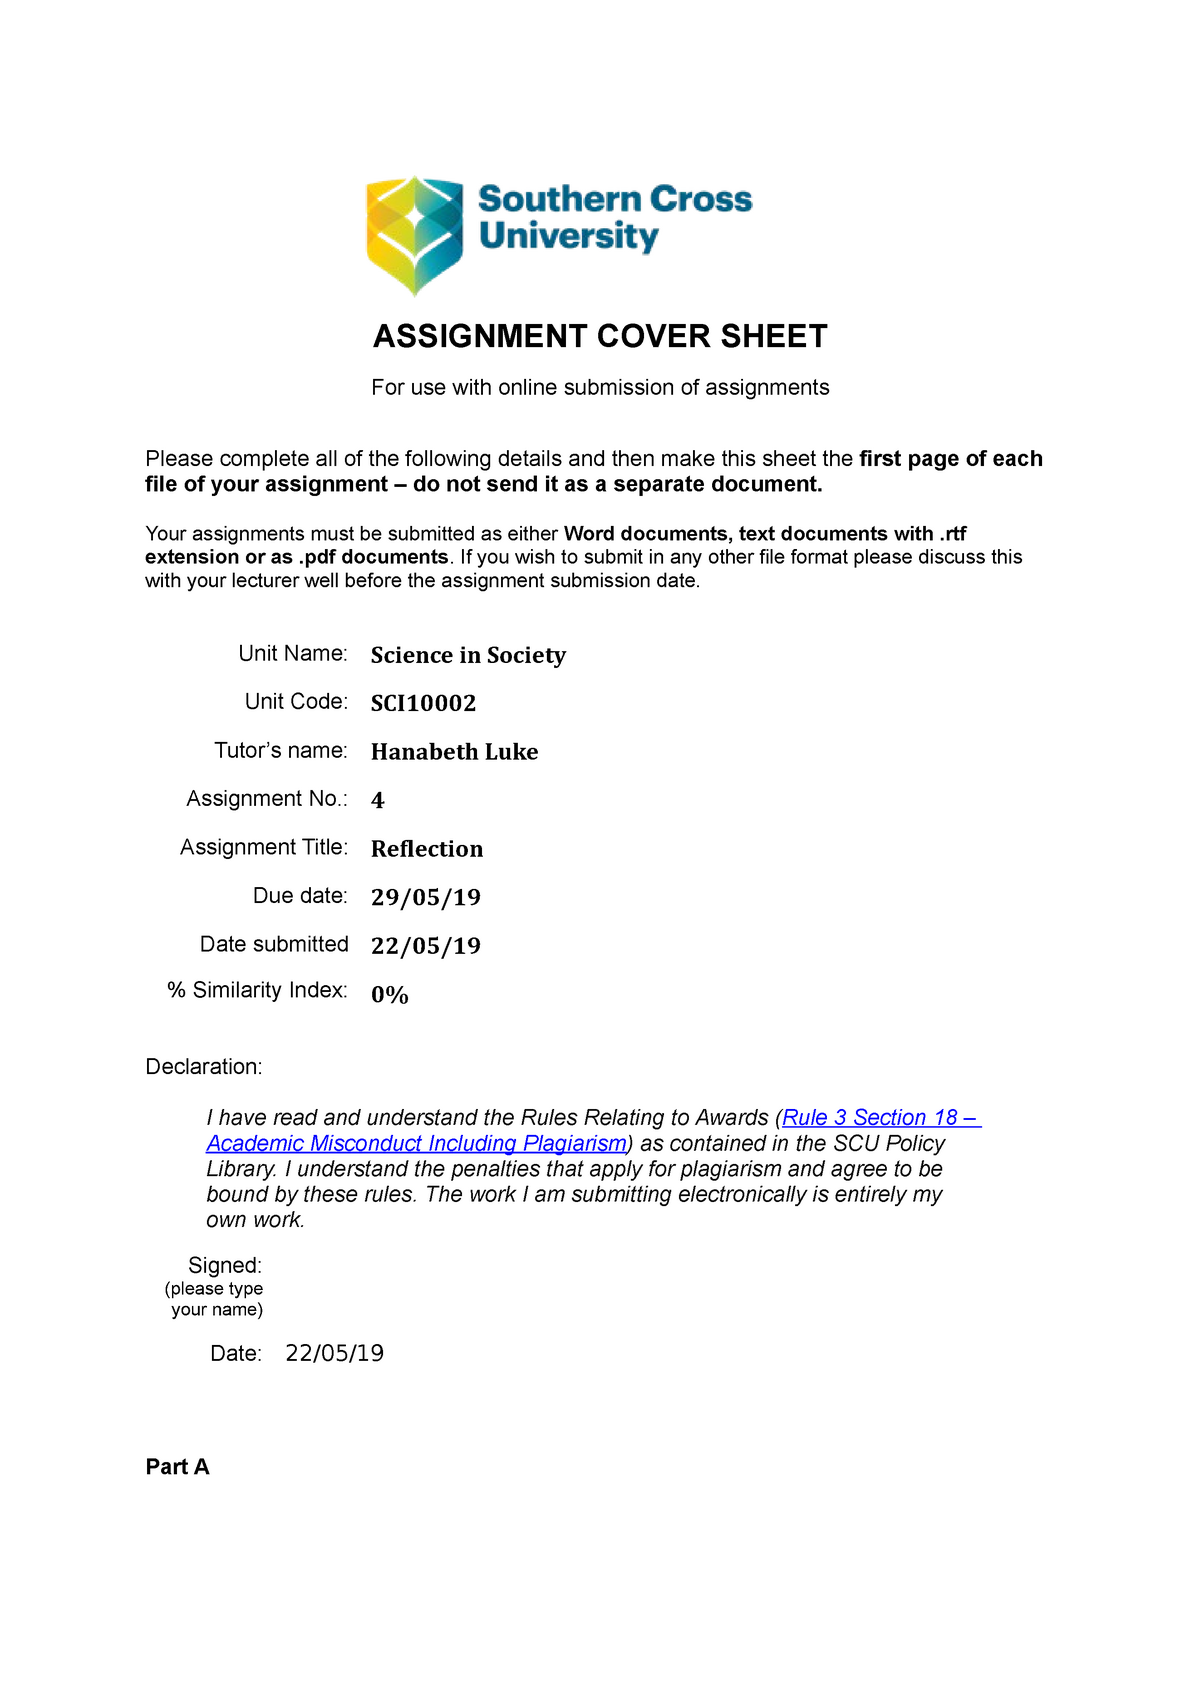 western sydney university assignment cover sheet